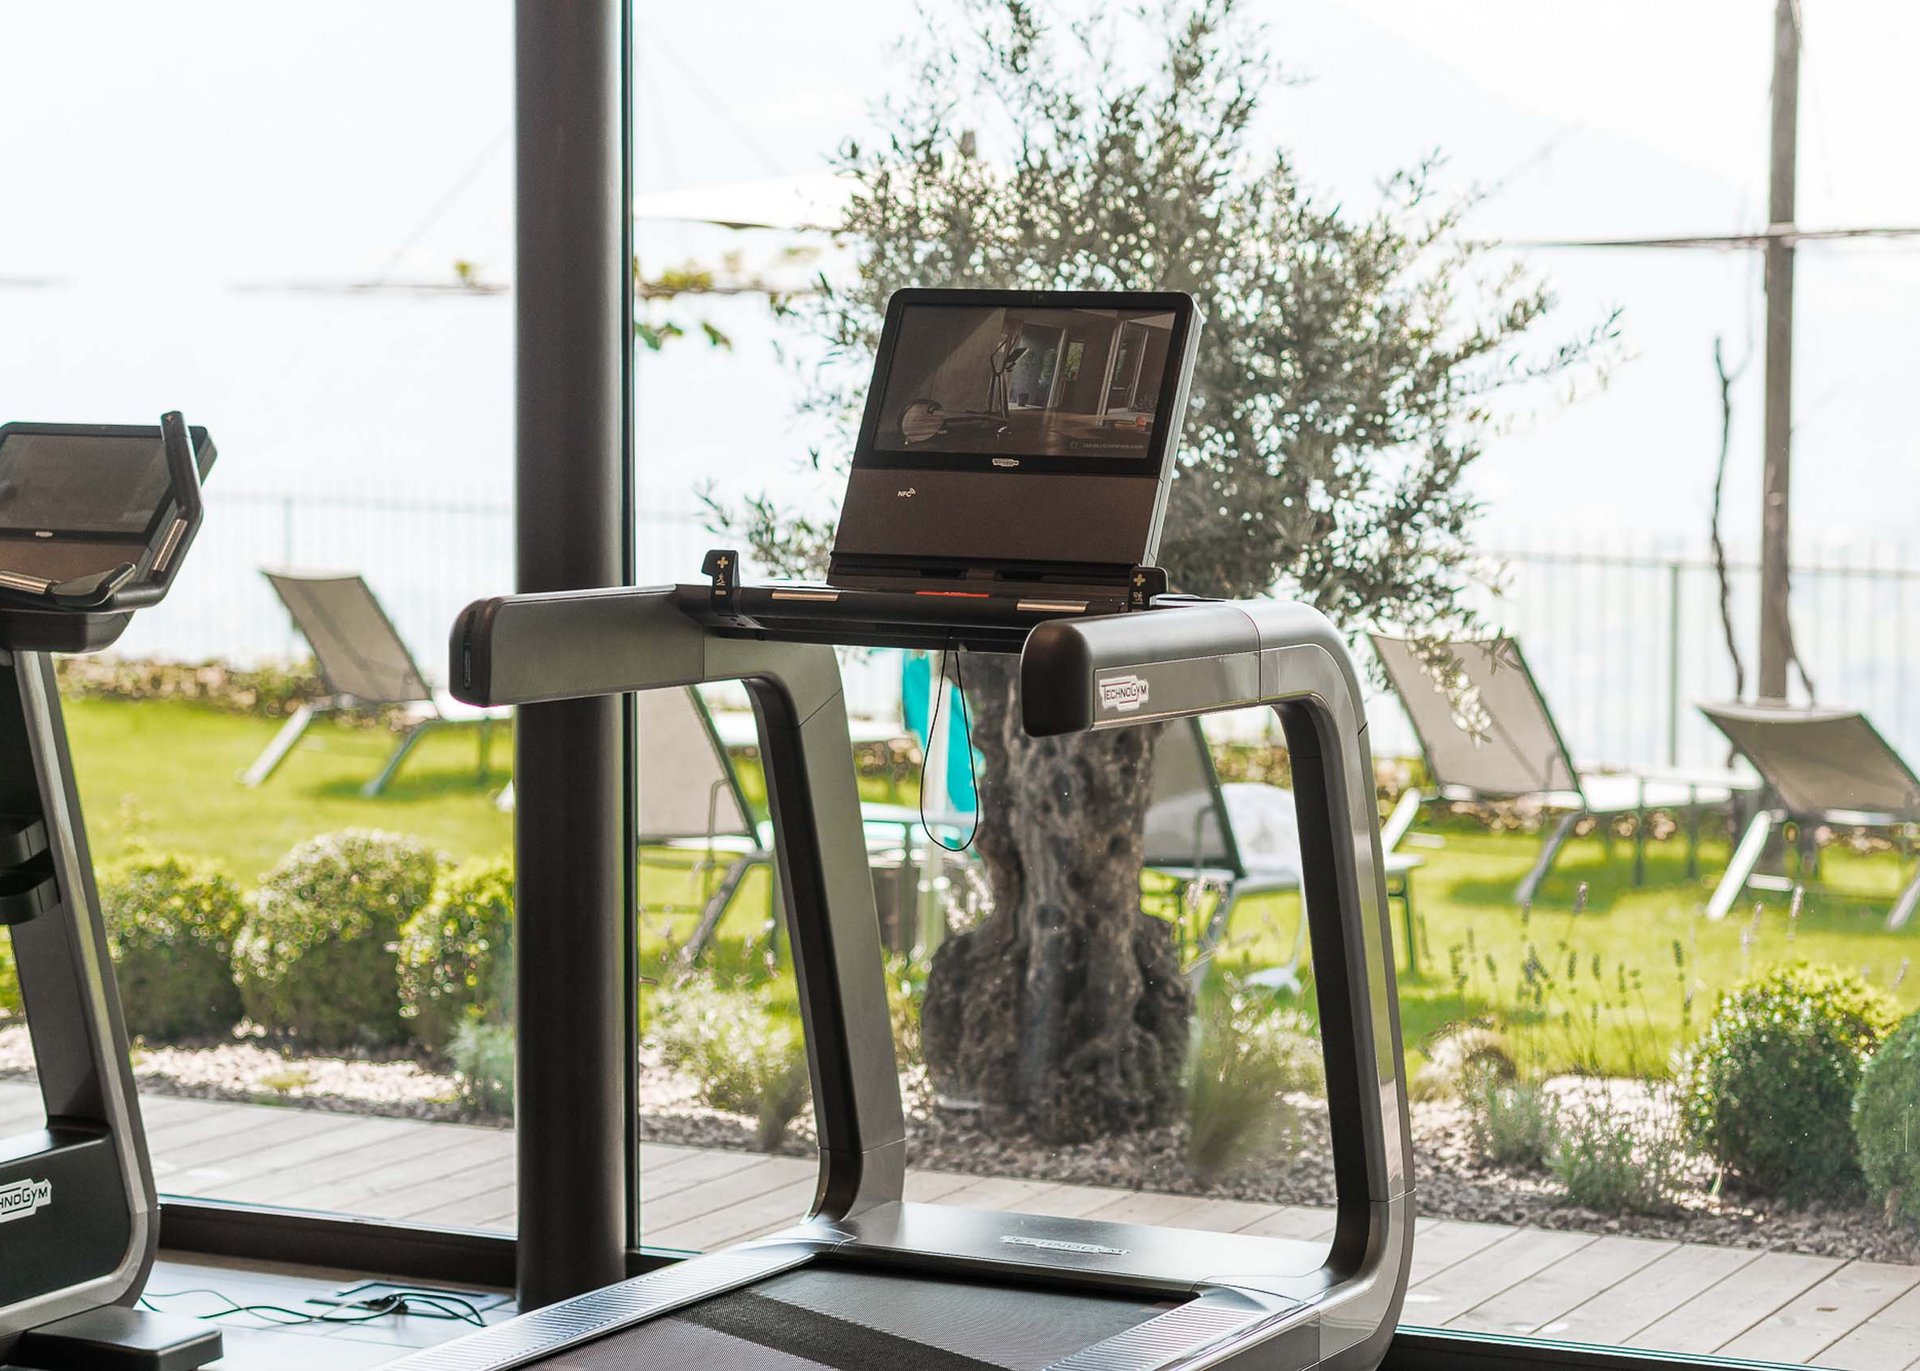 Fitness at Boutique Hotel Eschenlohe